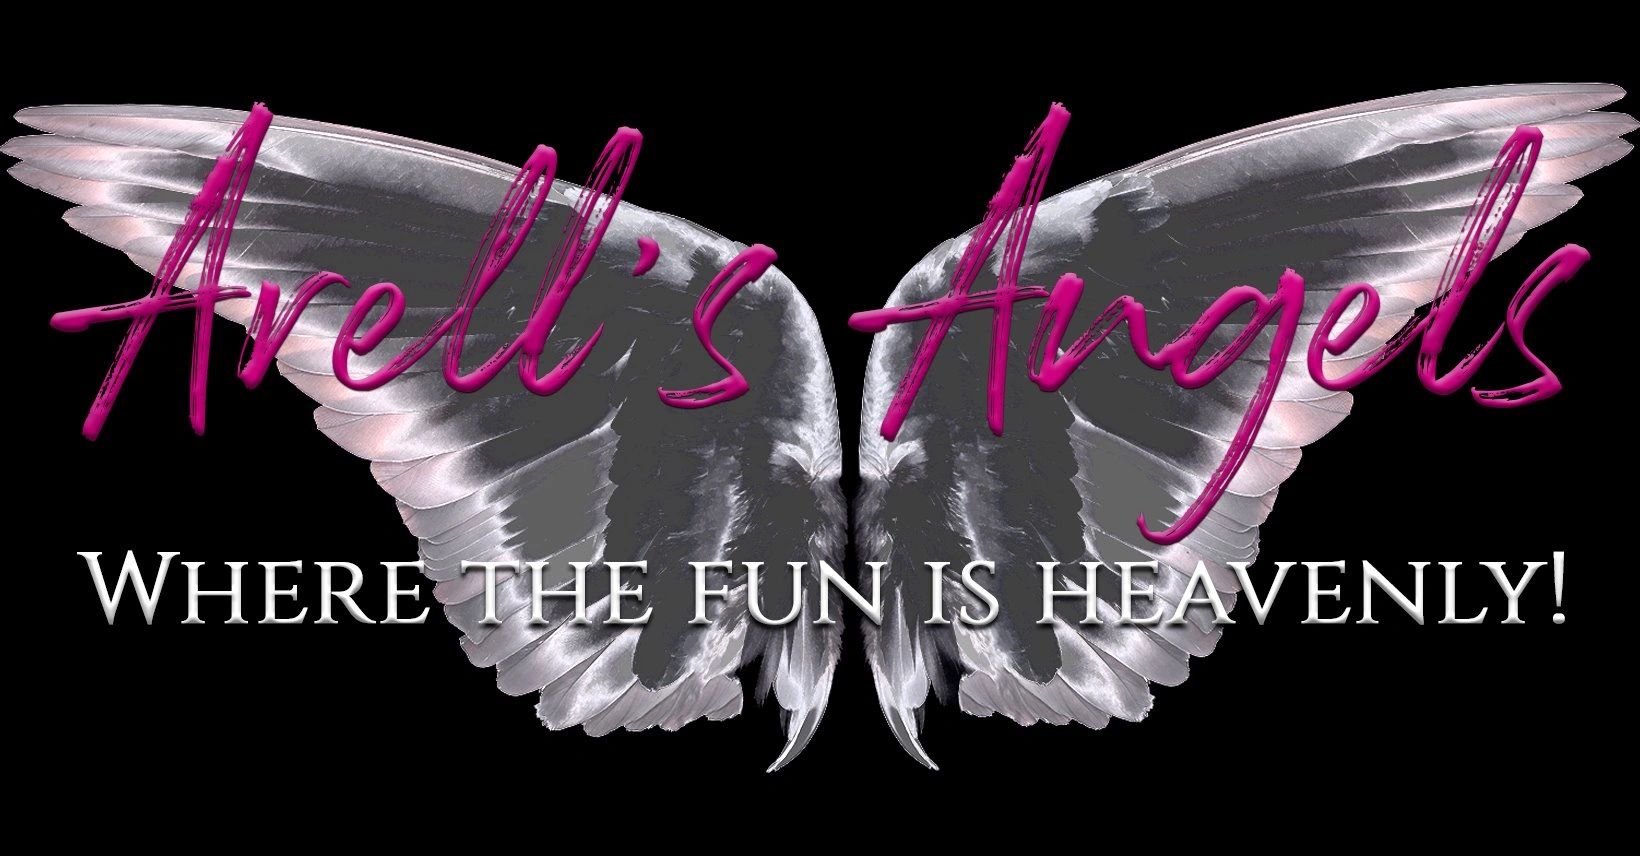 Arell's Angels - Arell Rivers' Facebook Group